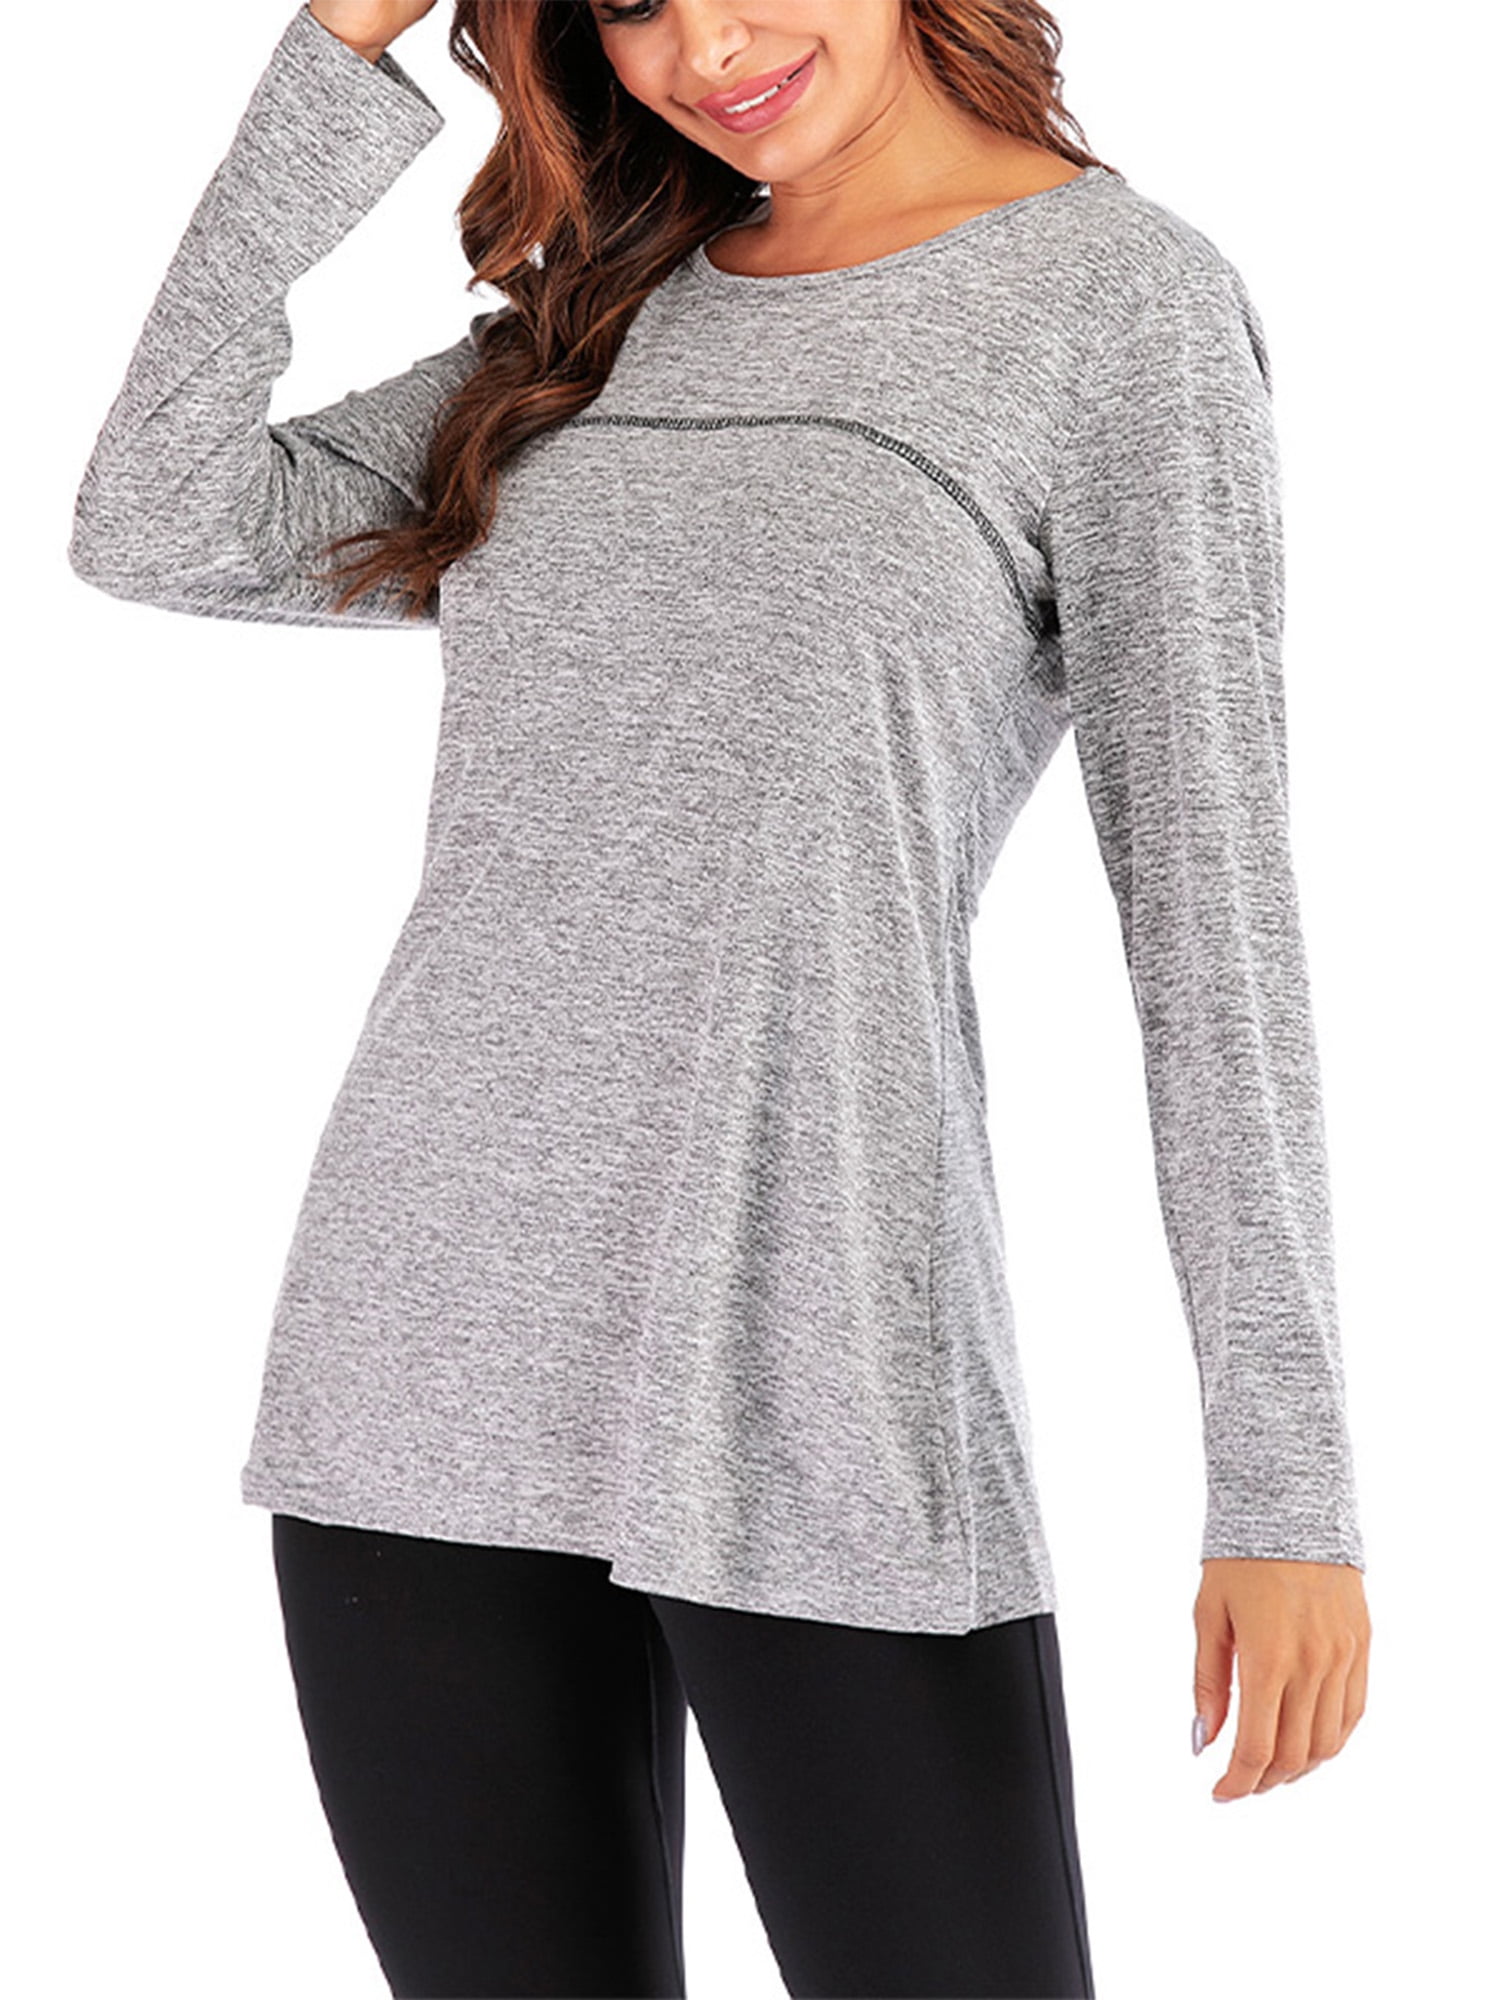 Womens Long Sleeve Stretchy Loose Crew Neck Casual Thumbhole Active Pullover Top